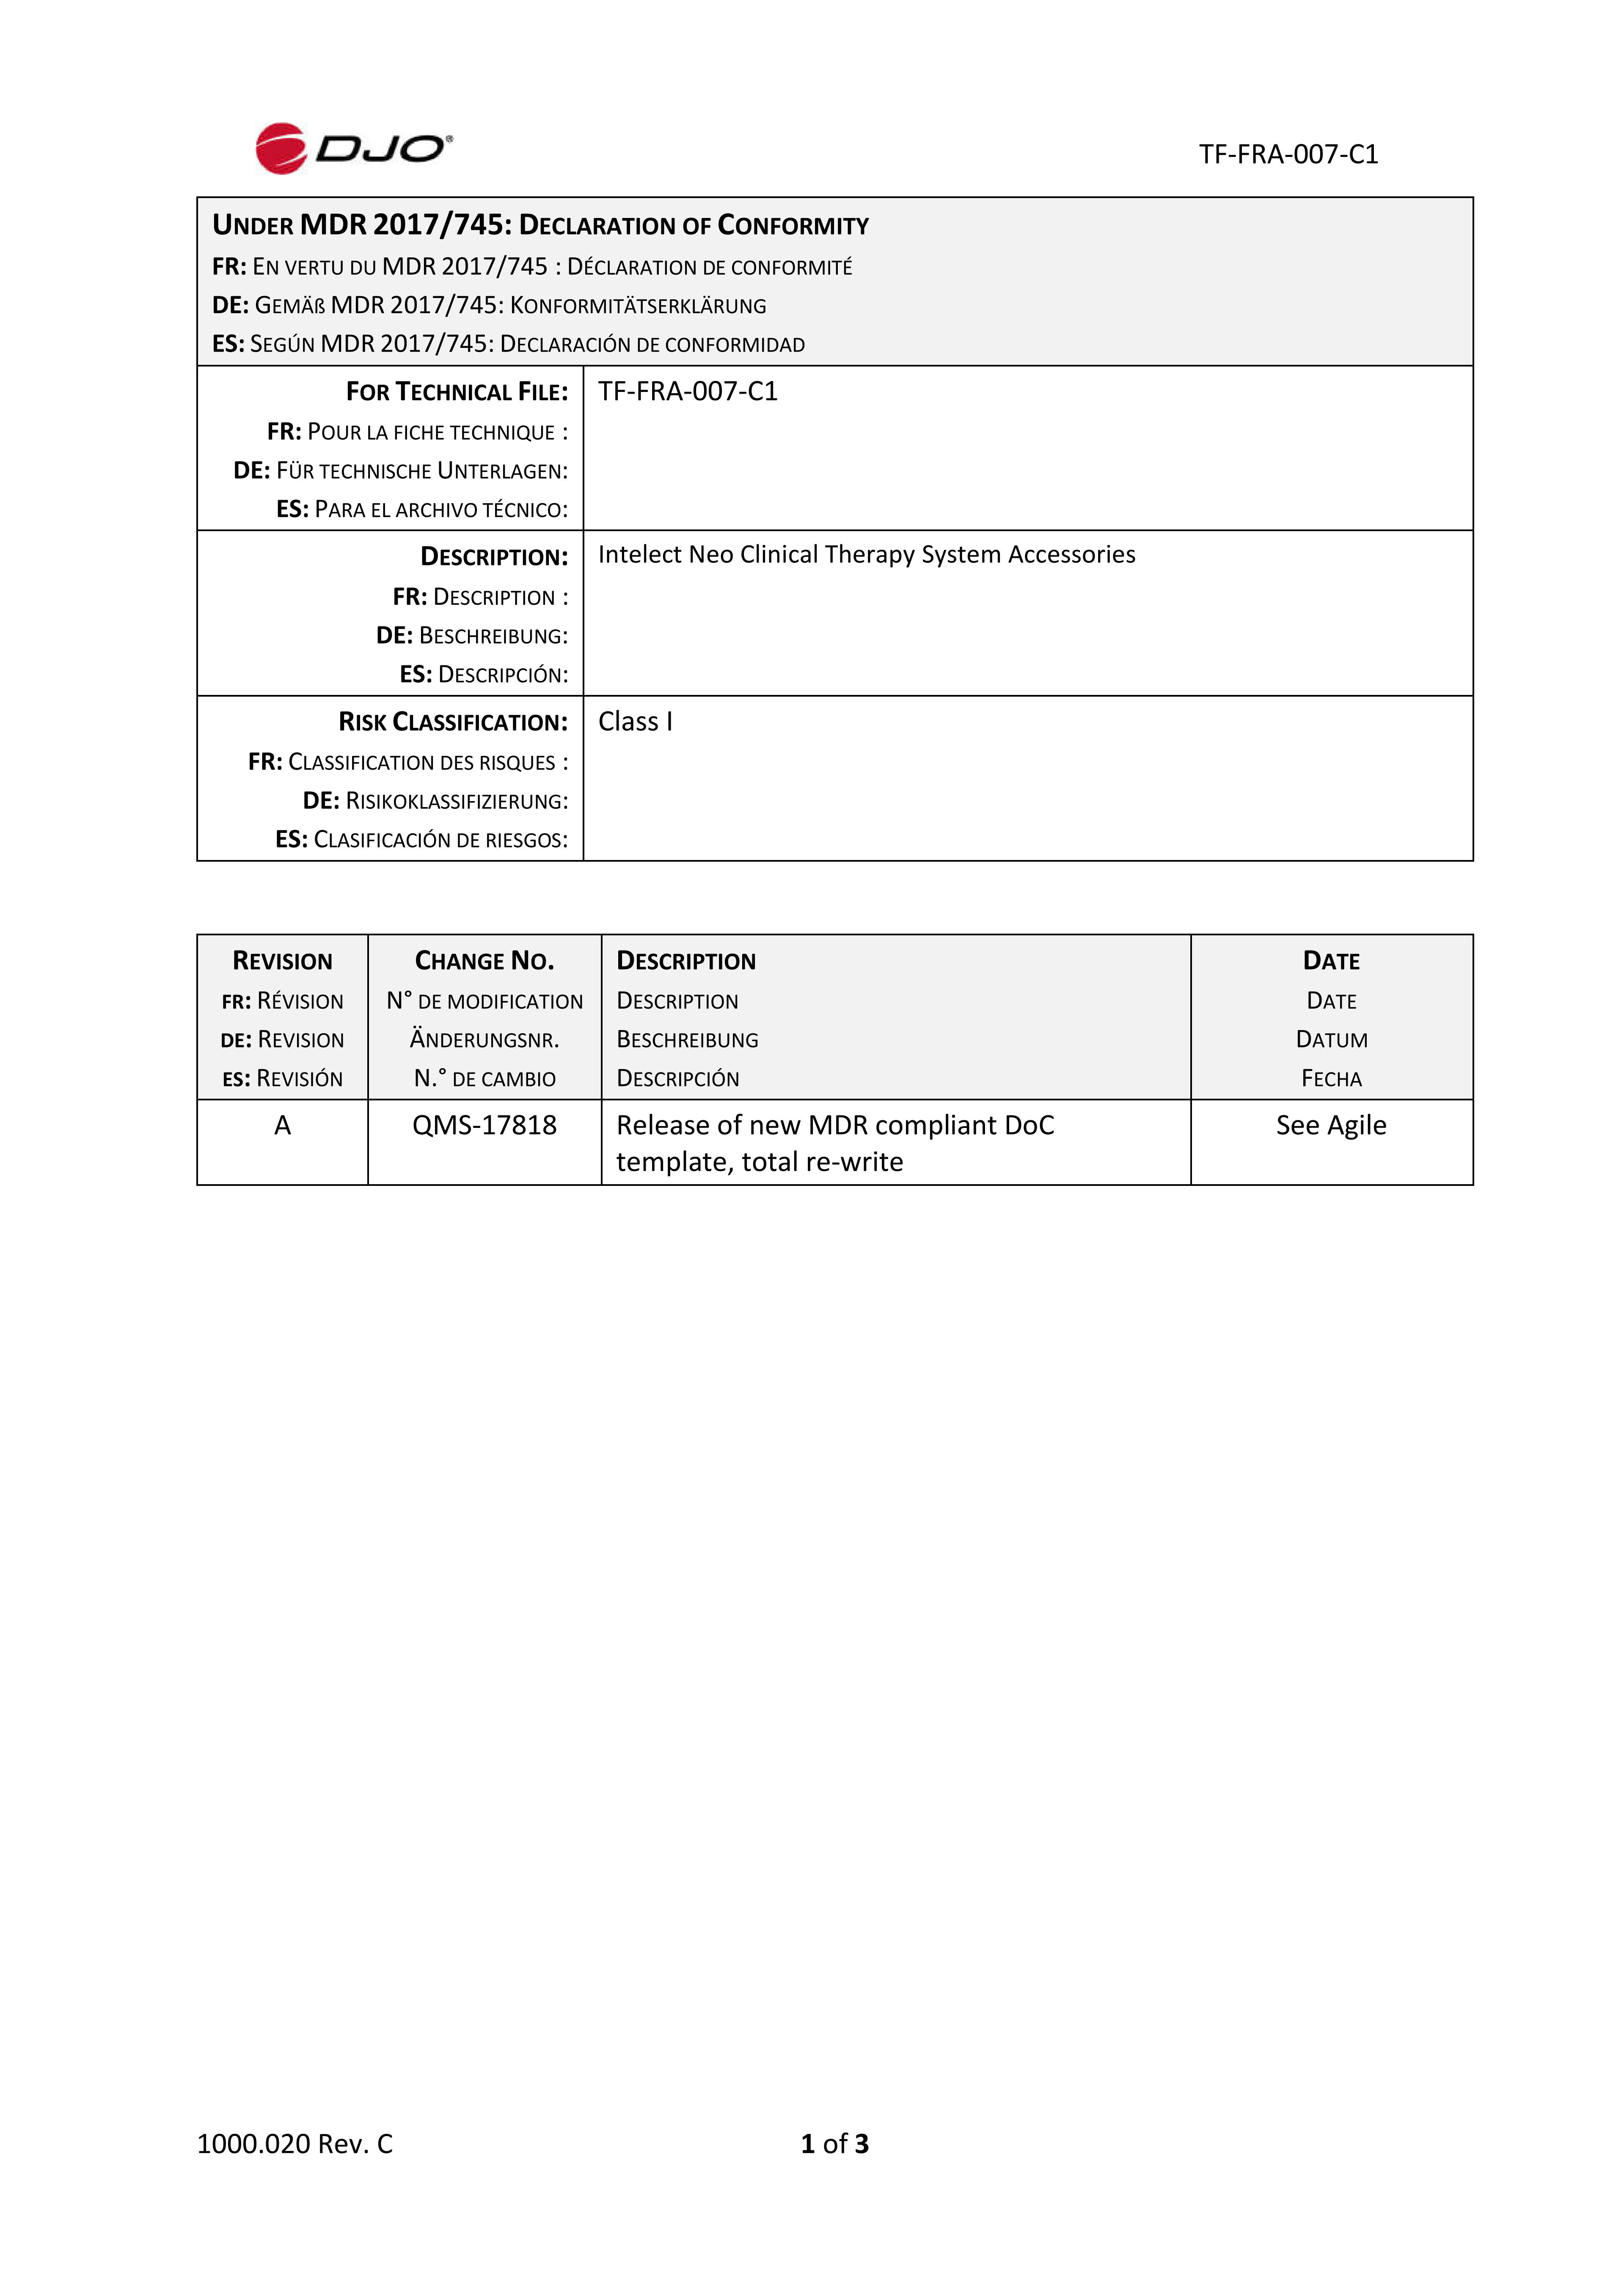 TF-FRA-007-C1_ Intelect Neo Clinical Therapy System Accessories DoC_Rev A.pdf